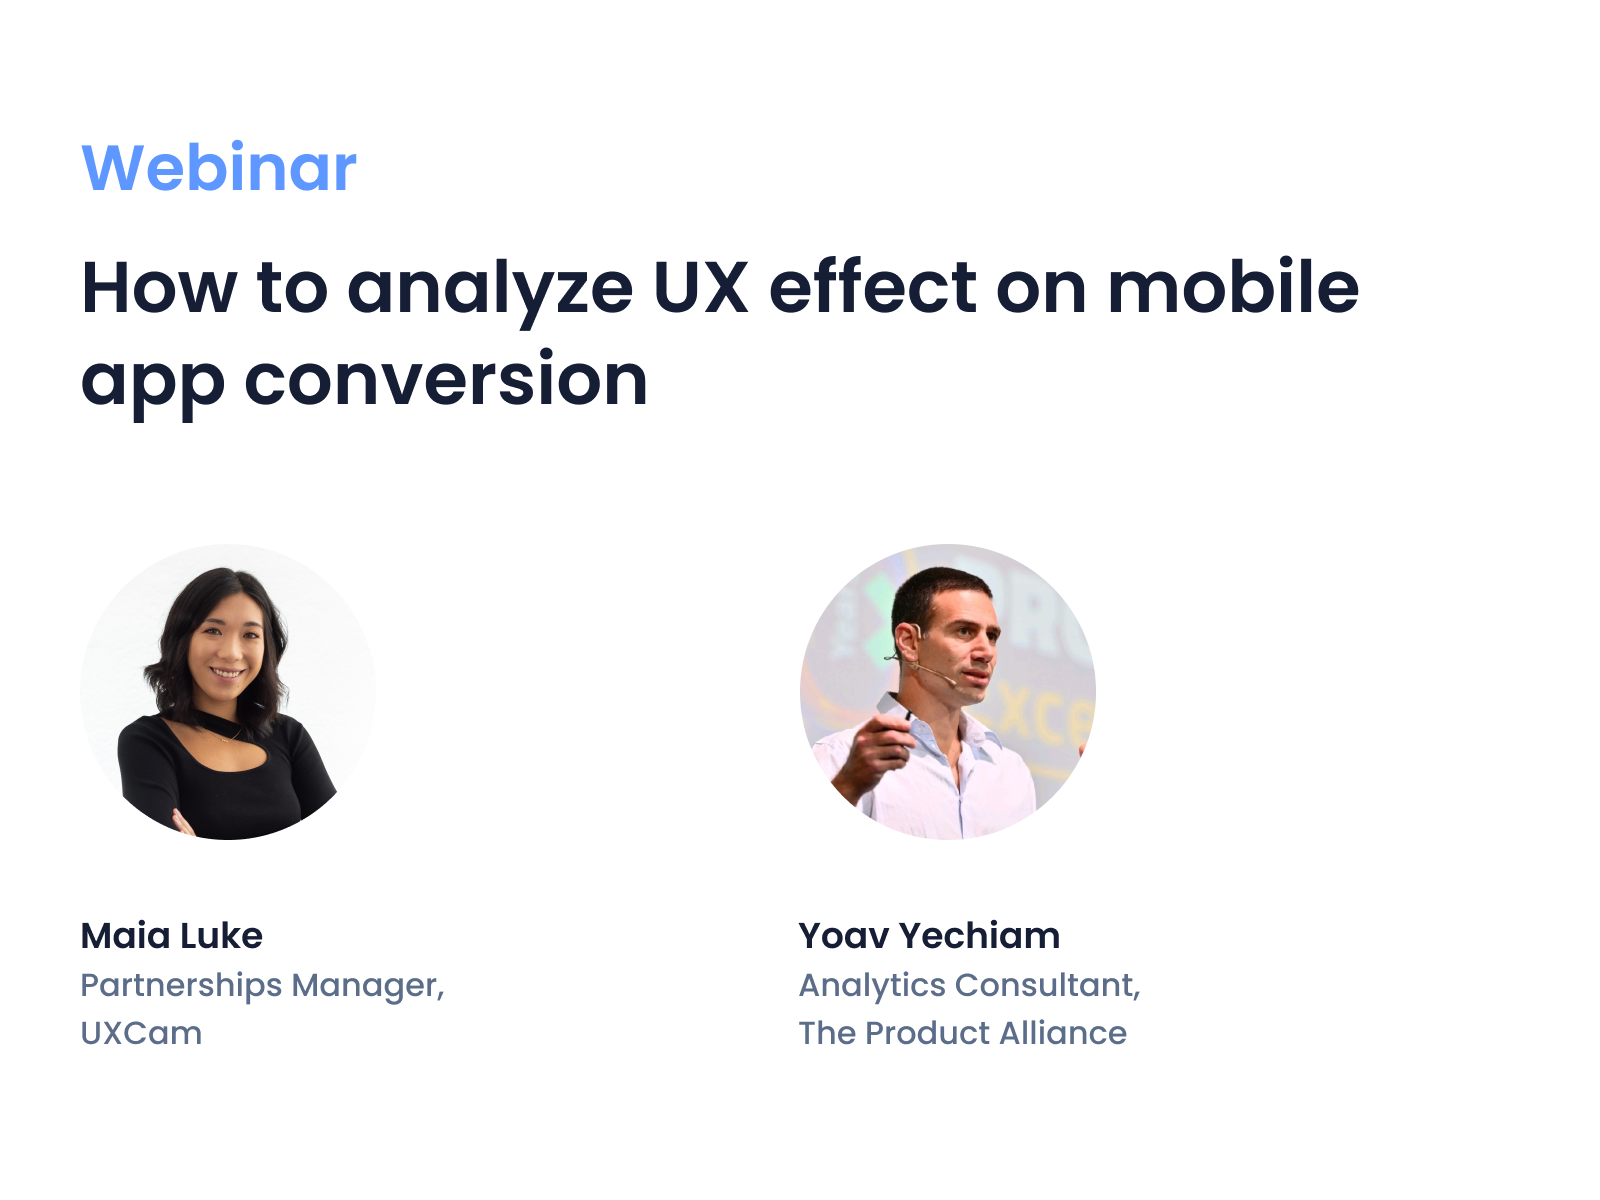 Webinar: How to analyze UX effect on mobile app conversion